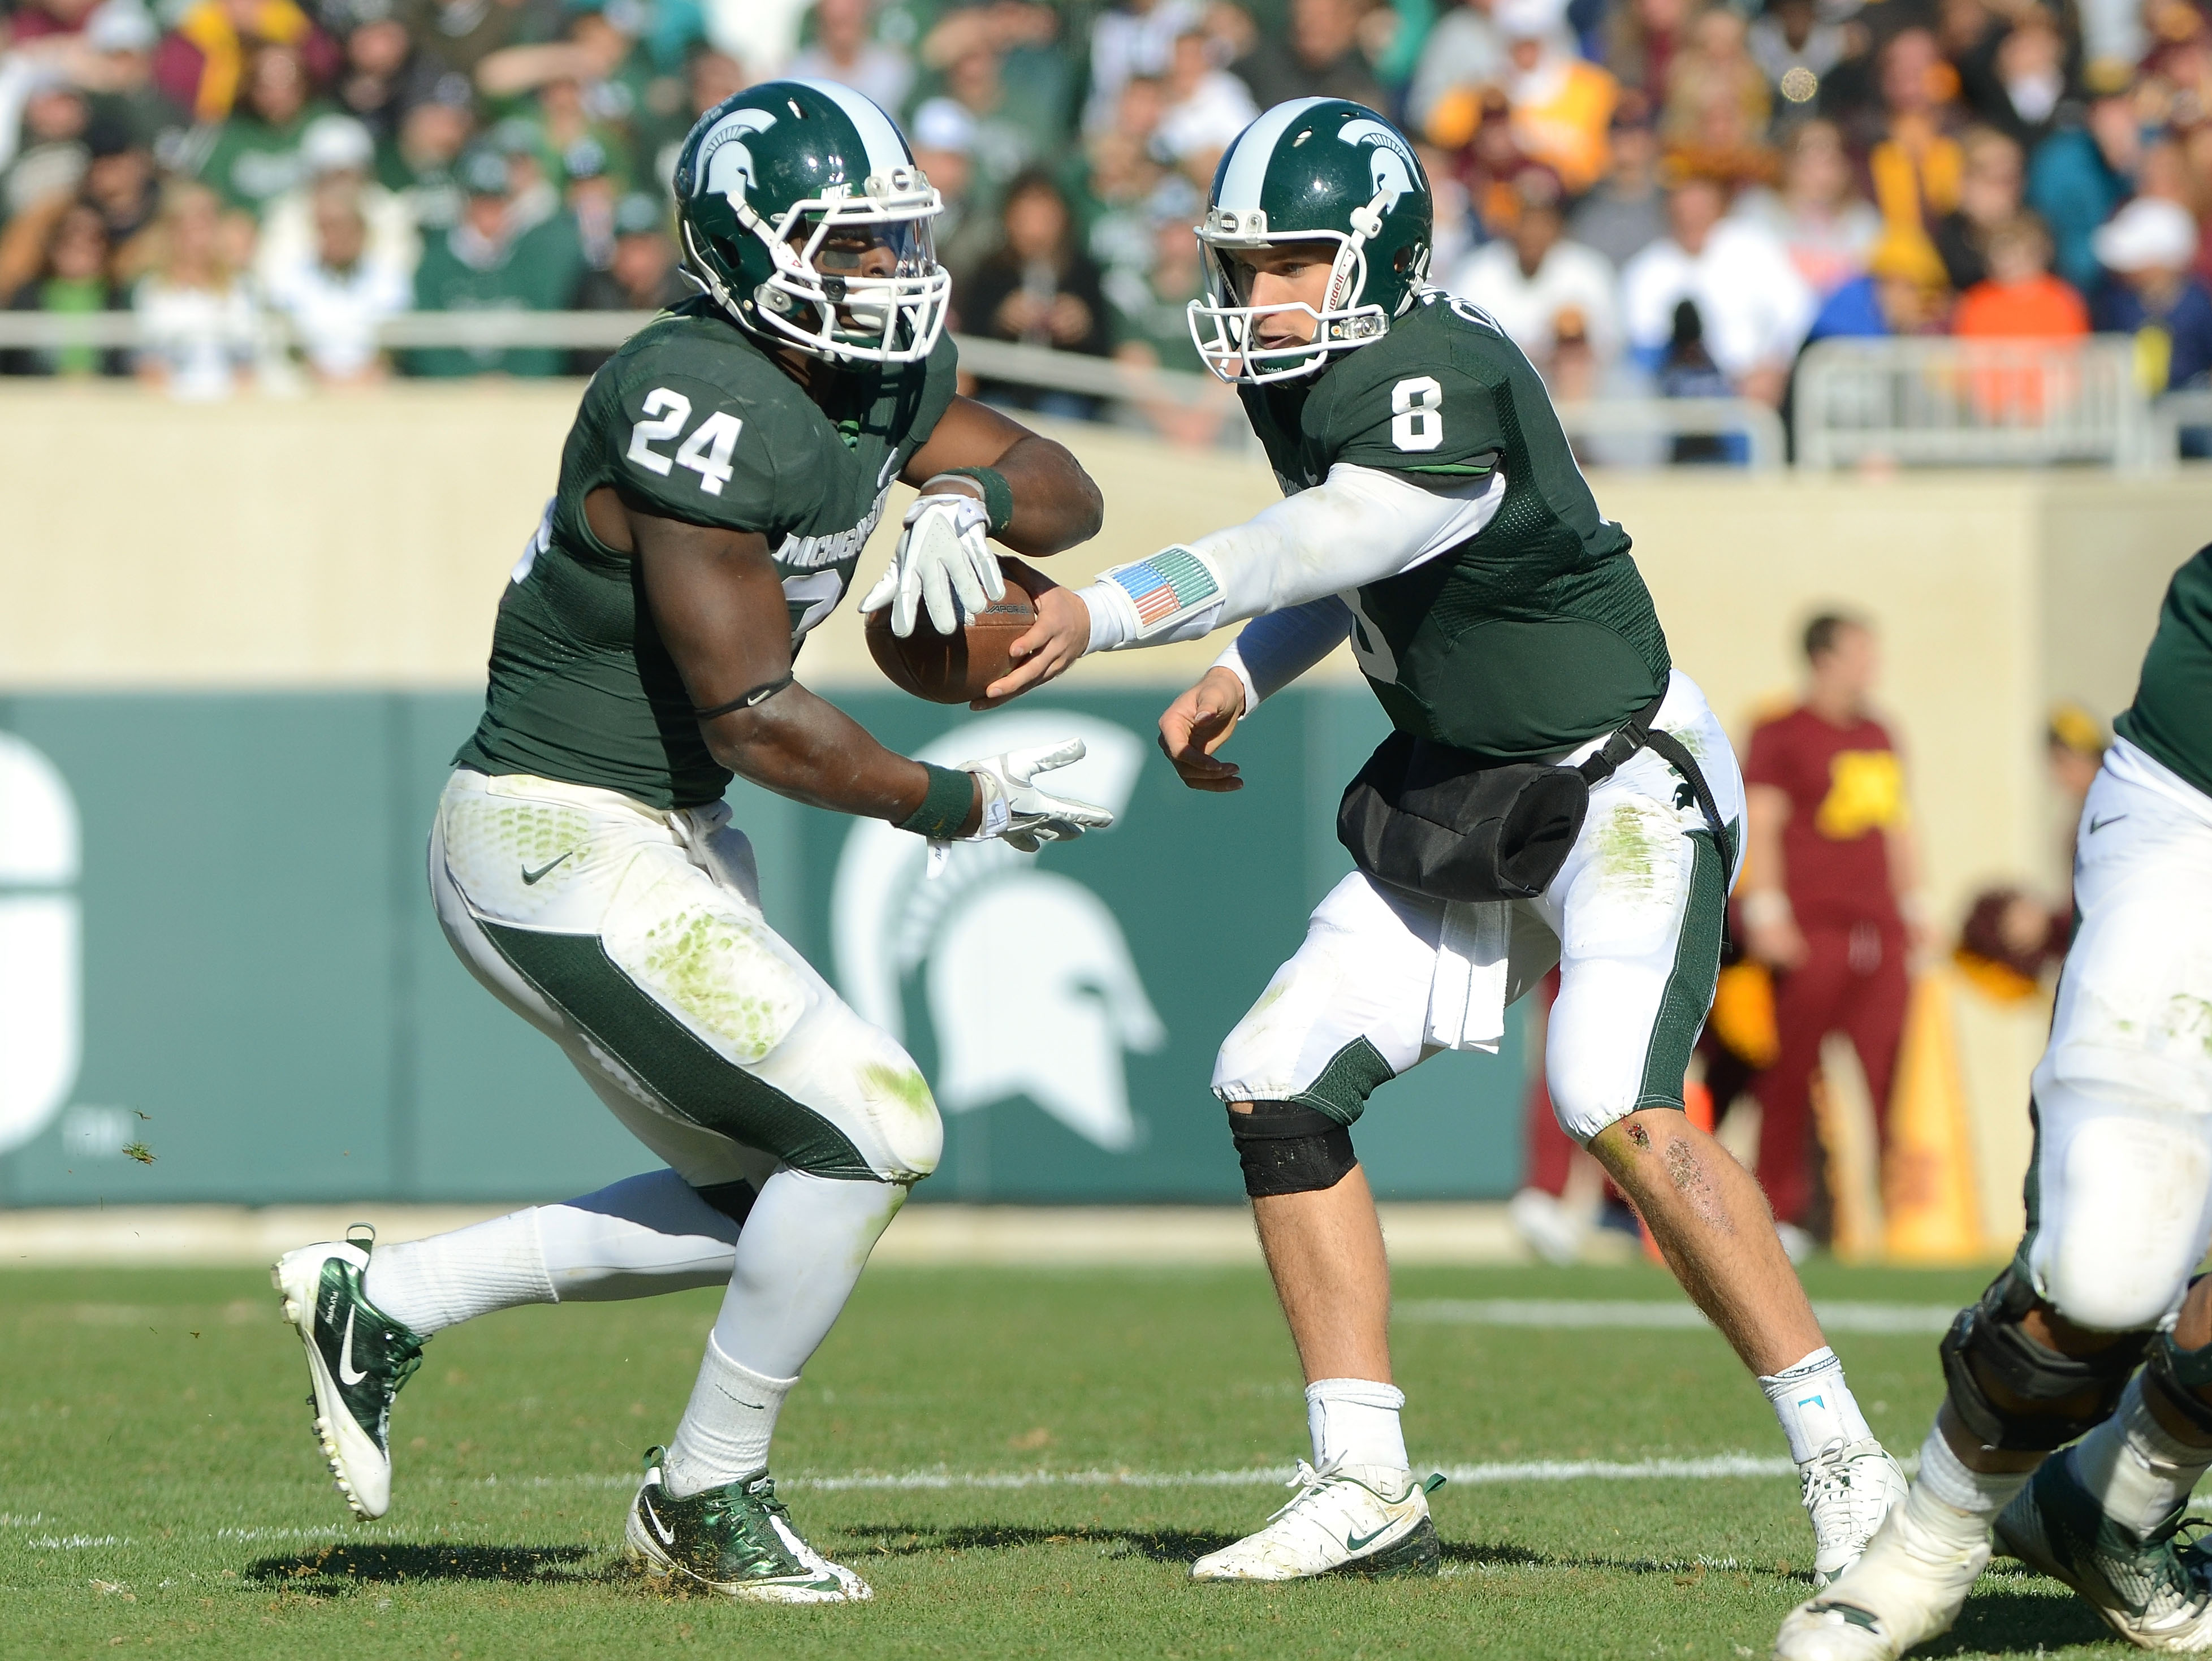 Kirk Cousins, Brian Hoyer, and Le’Veon Bell: Michigan State Spartans Making an Impact in the NFL Today